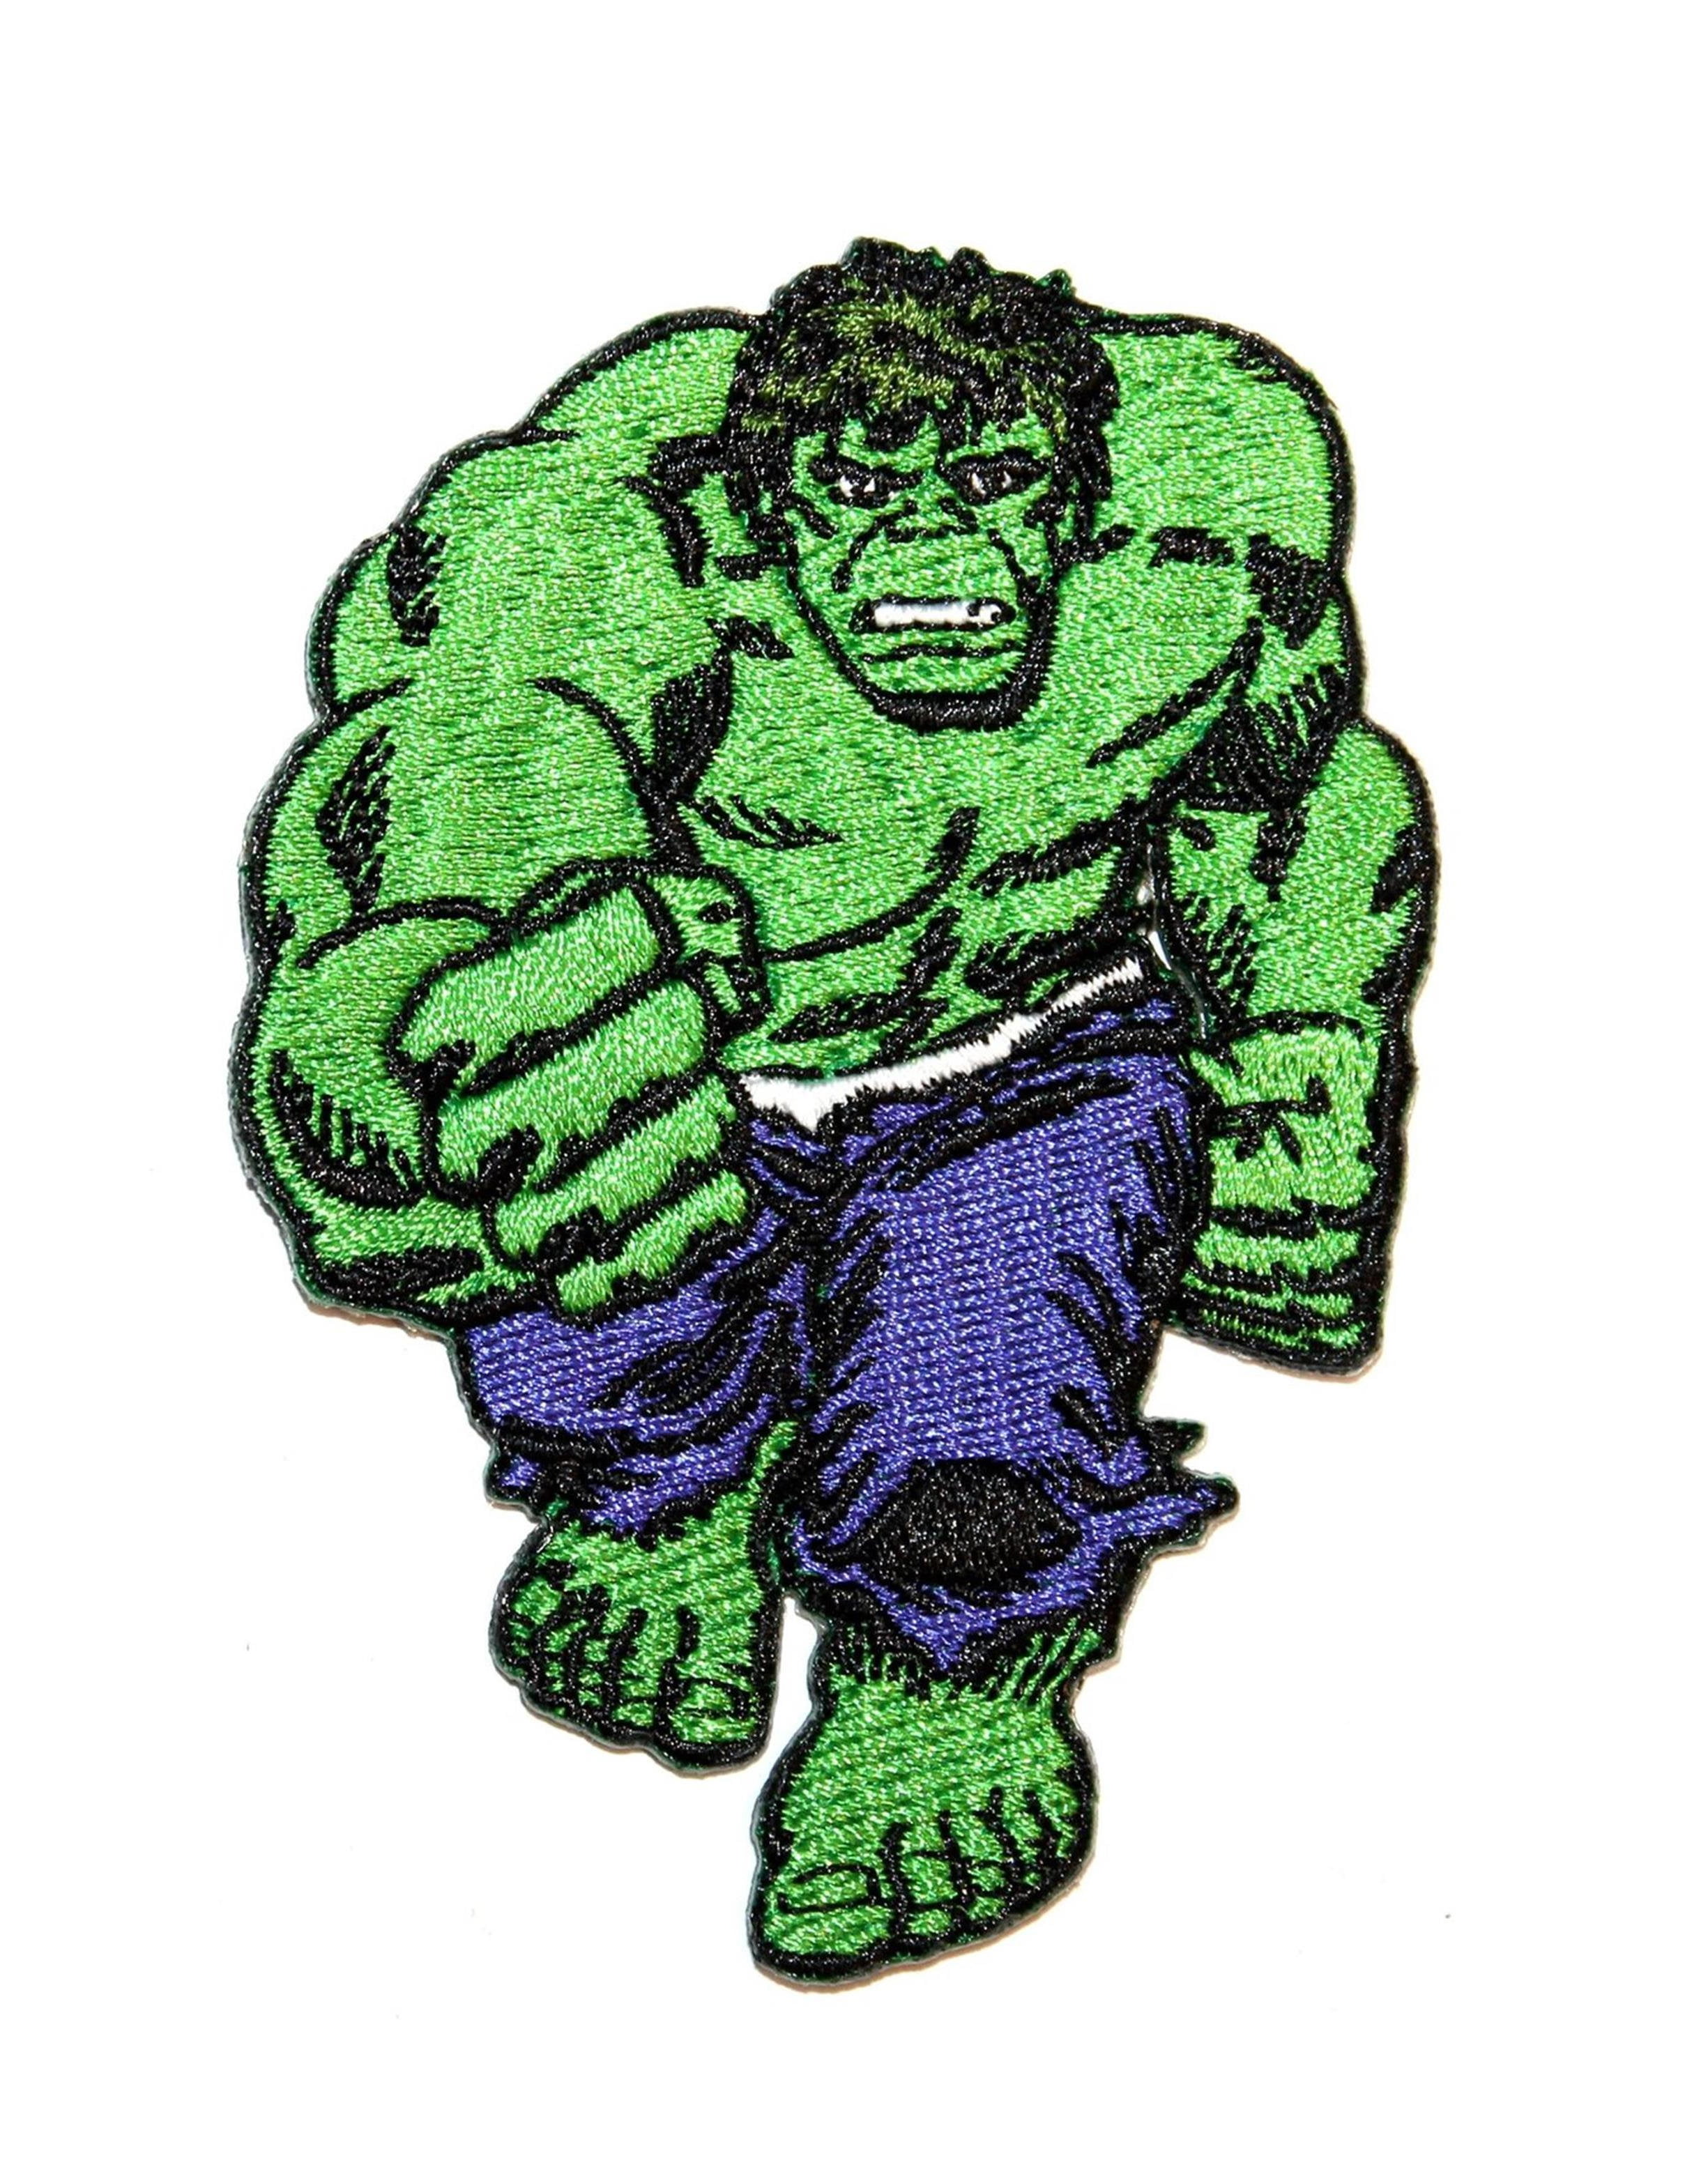 Official Marvel Comics Avengers The Incredible Hulk Script Iron on Applique Patch 